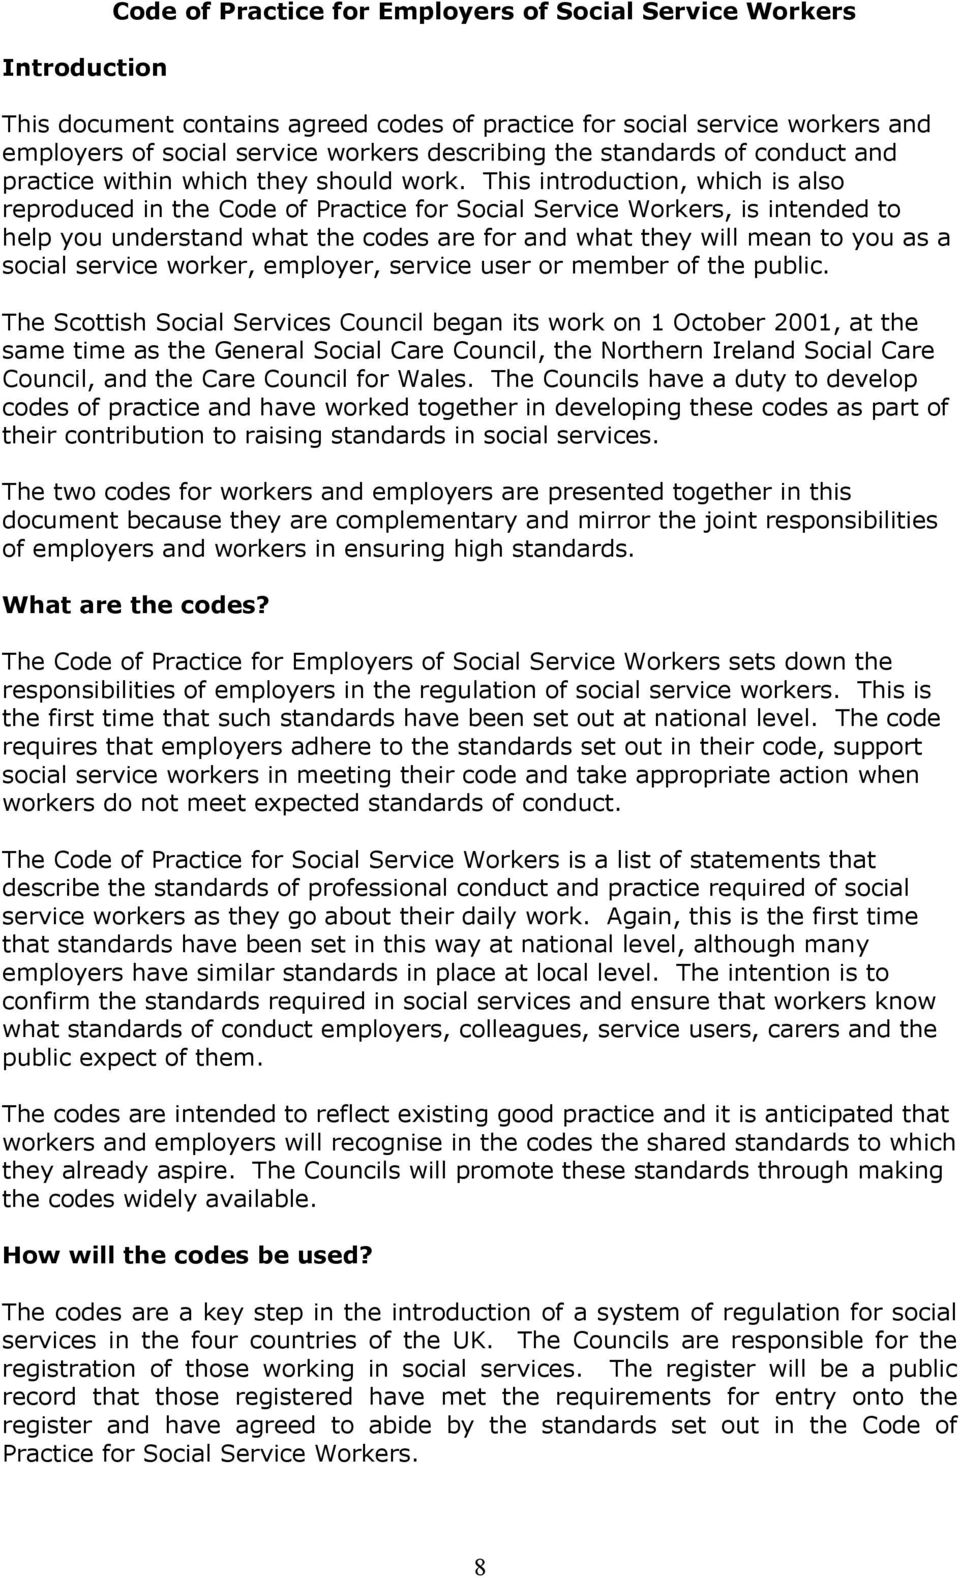 This introduction, which is also reproduced in the Code of Practice for Social Service Workers, is intended to help you understand what the codes are for and what they will mean to you as a social